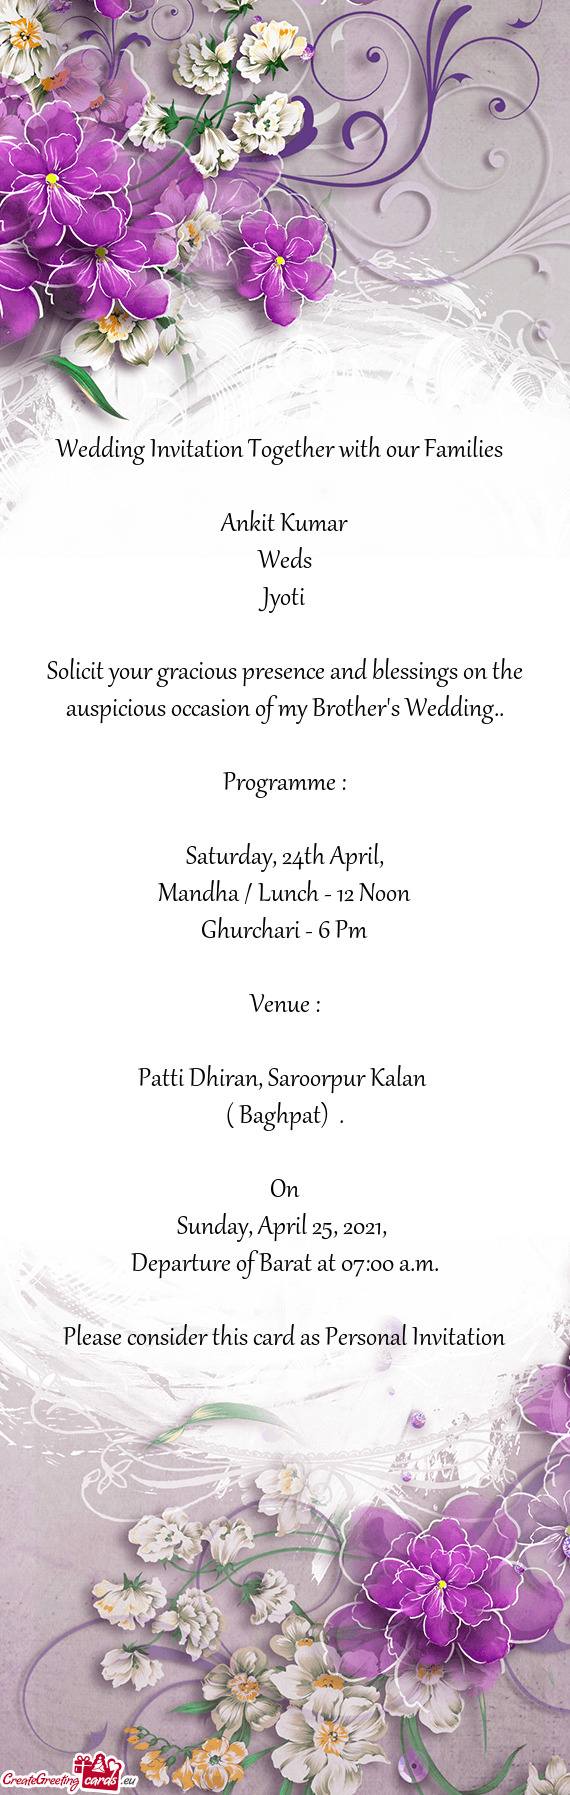 Wedding Invitation Together with our Families